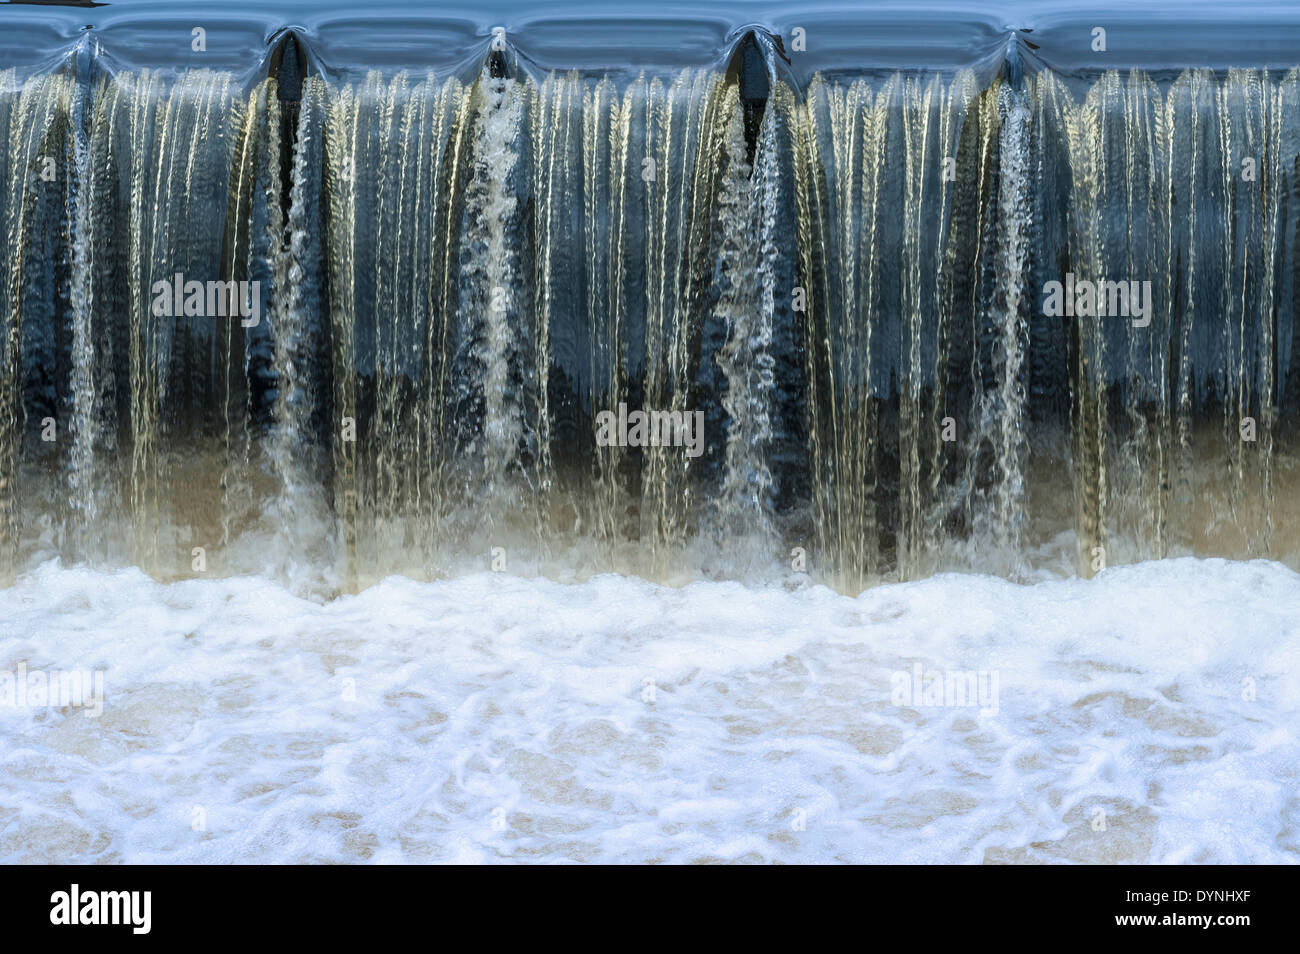 Man-Made Fish Ladder and Flood Defence closeup. River Isole, Quimperlé Brittany France Stock Photo